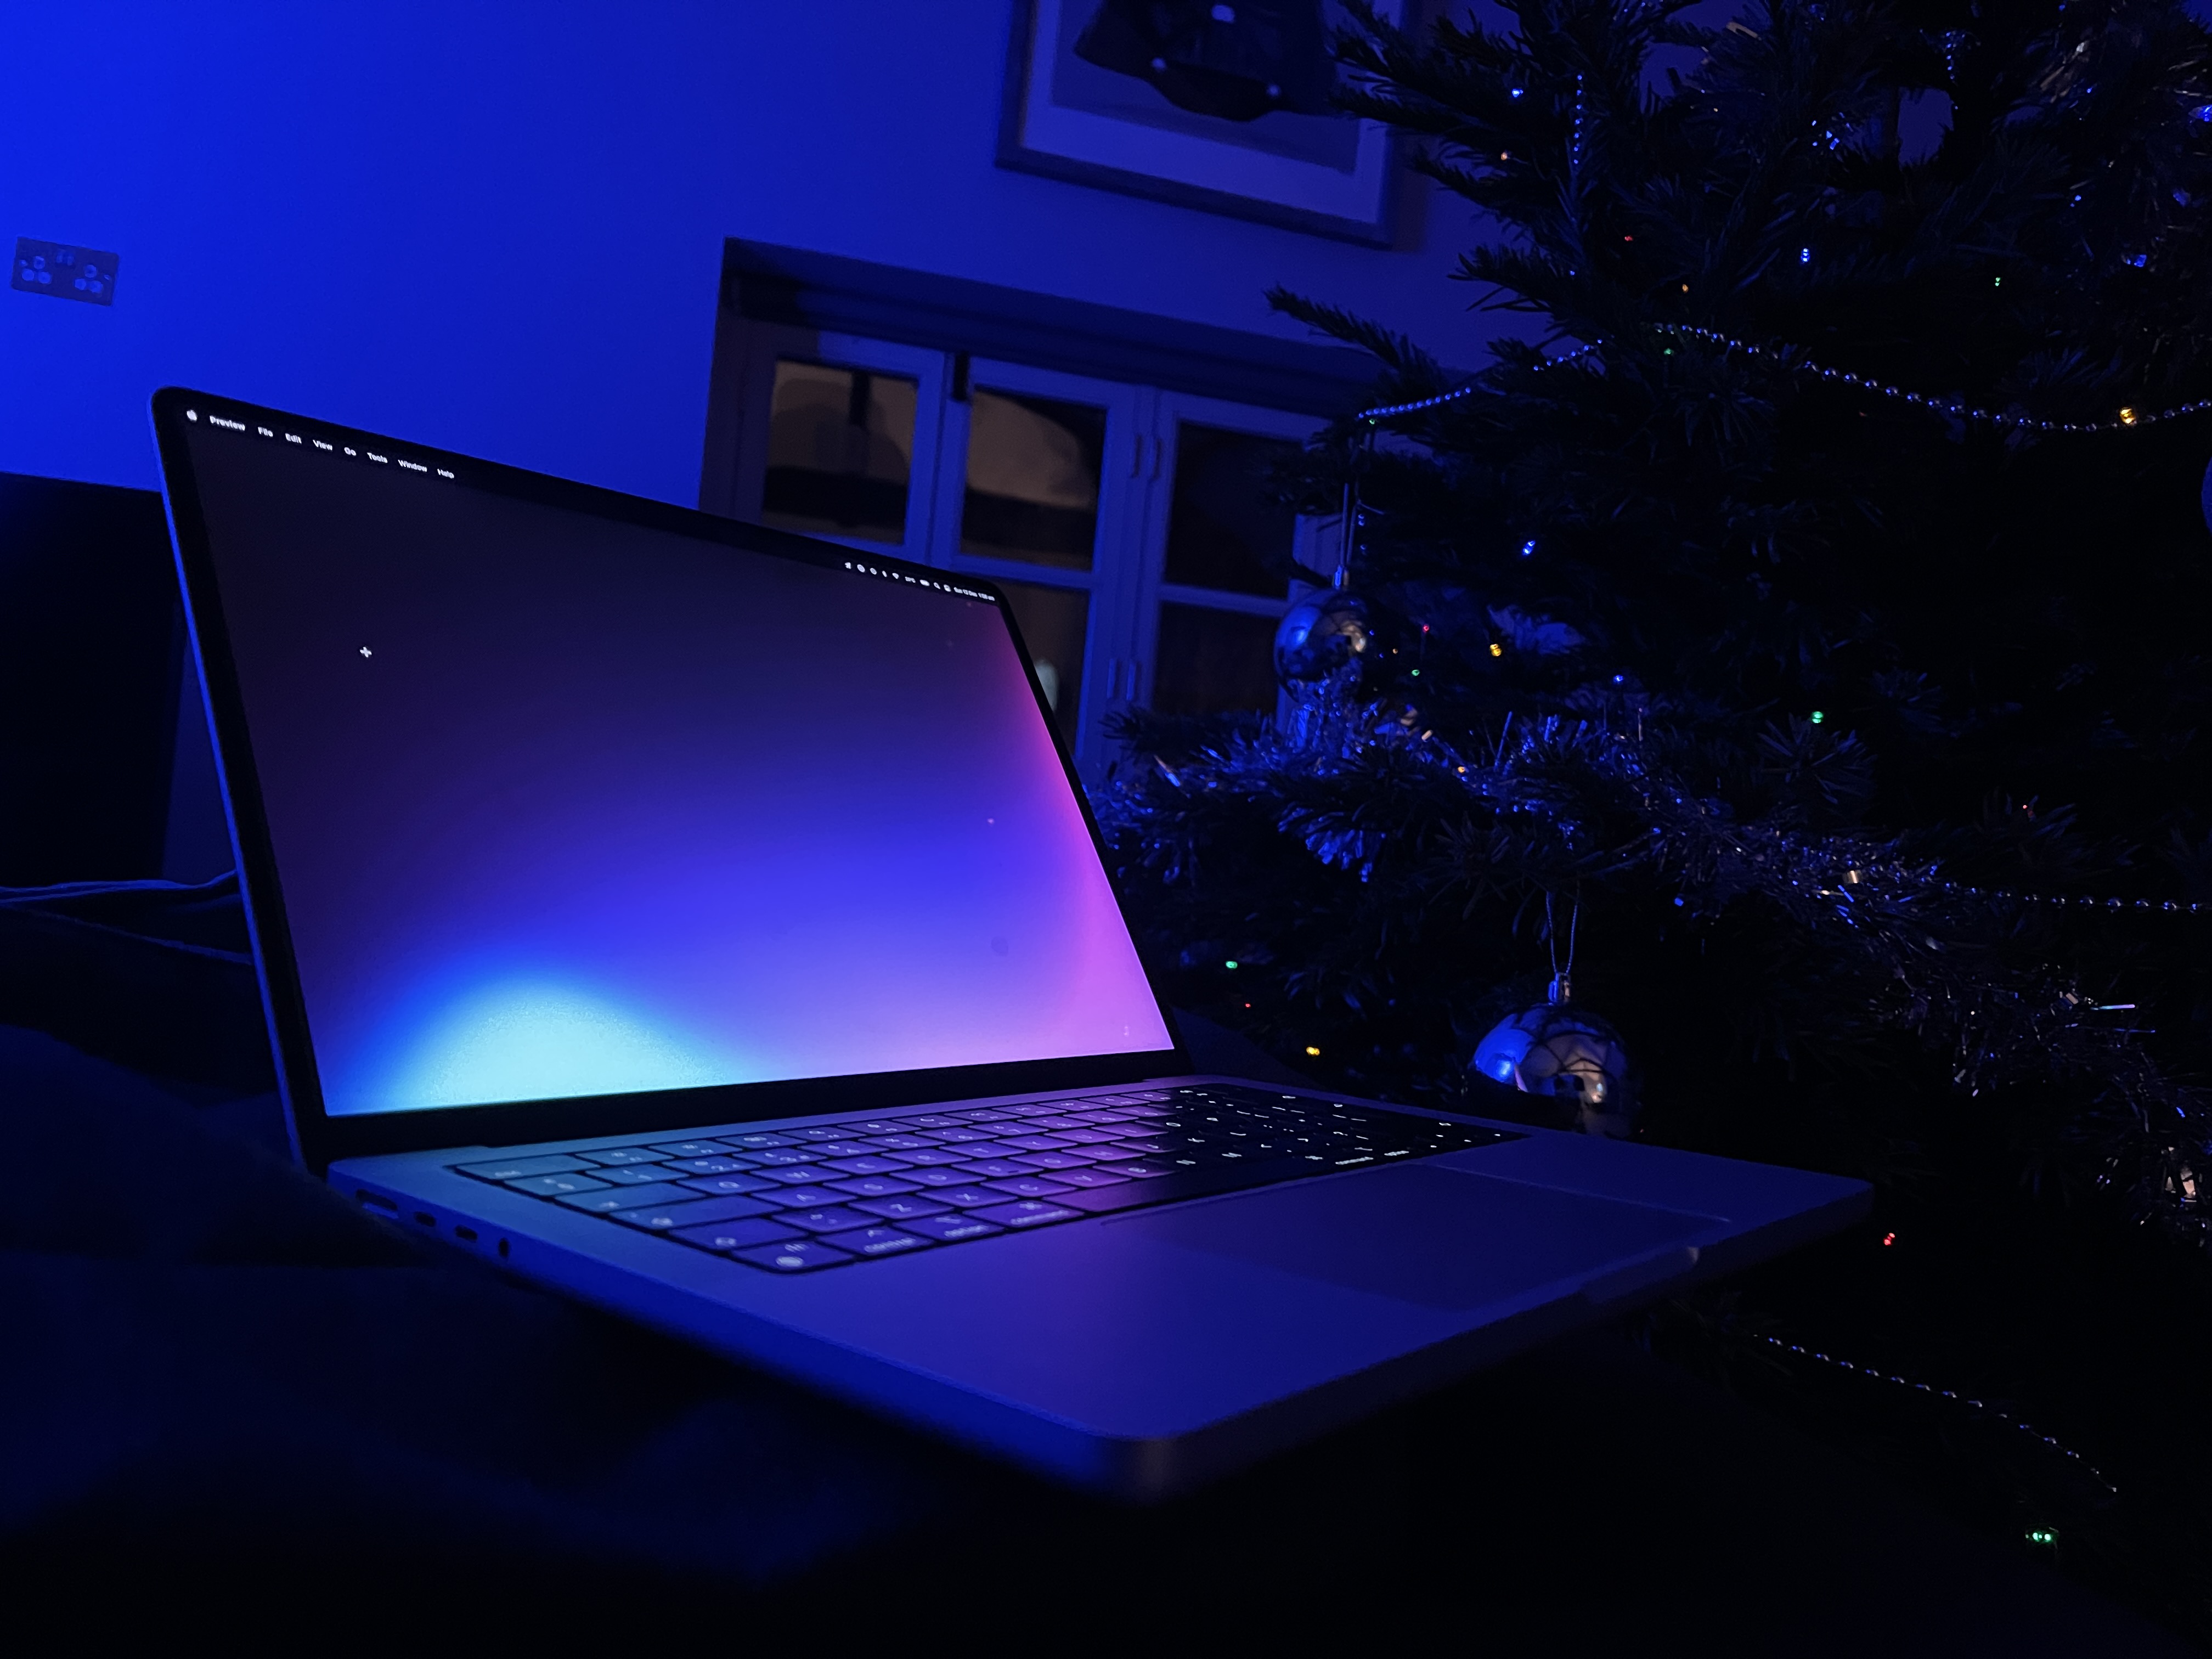 A photo of my new 14" Macbook Pro in silver